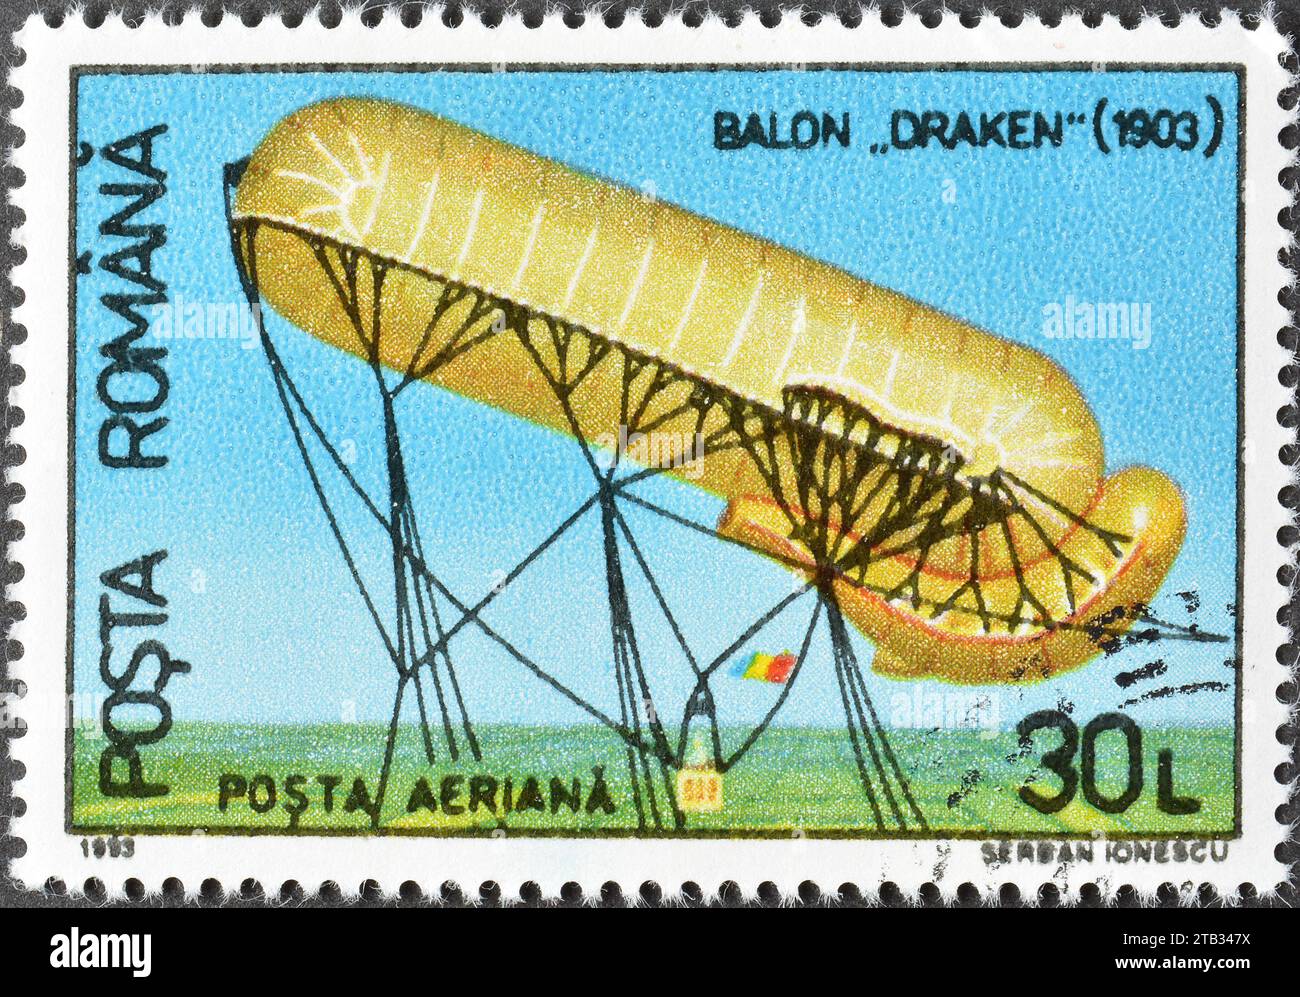 Cancelled postage stamp printed by Romania, that shows Draken (1903), circa 1993. Stock Photo